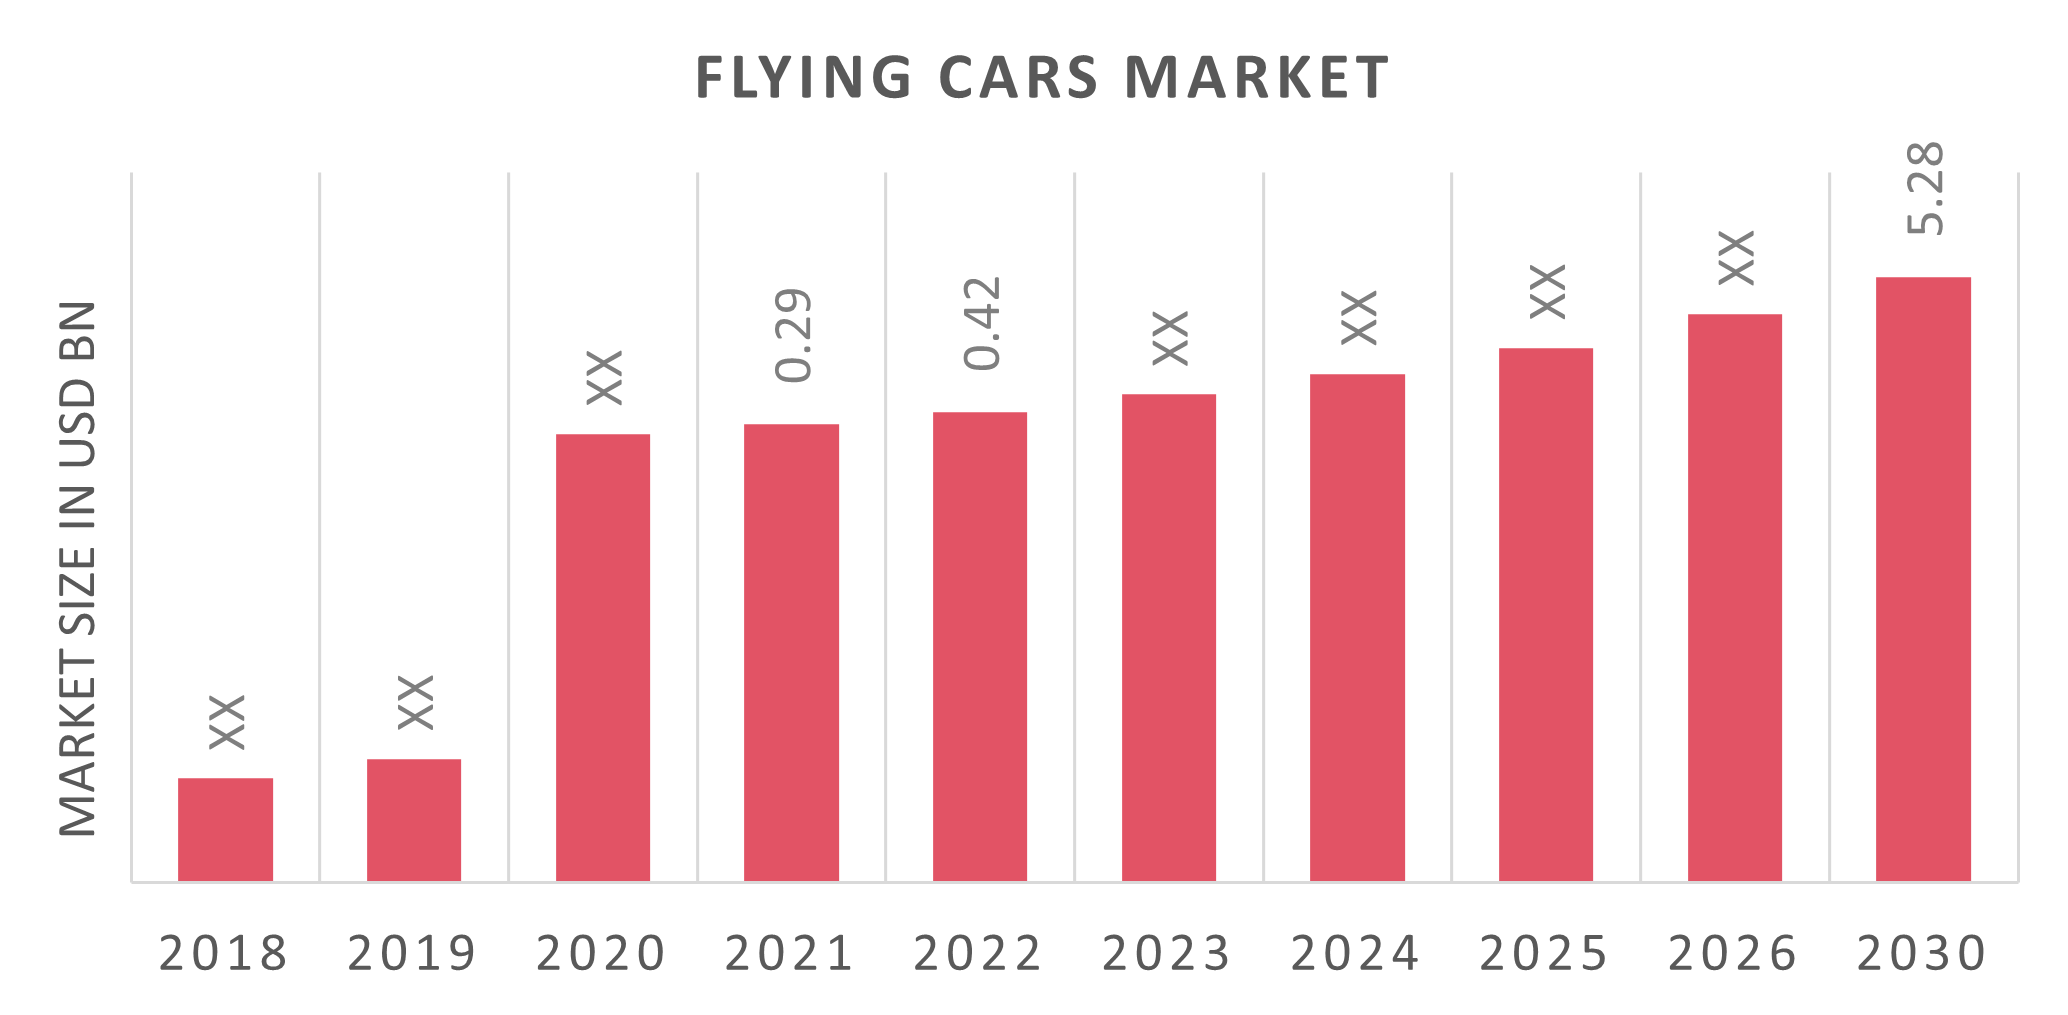 Global Flying Cars Market Overview